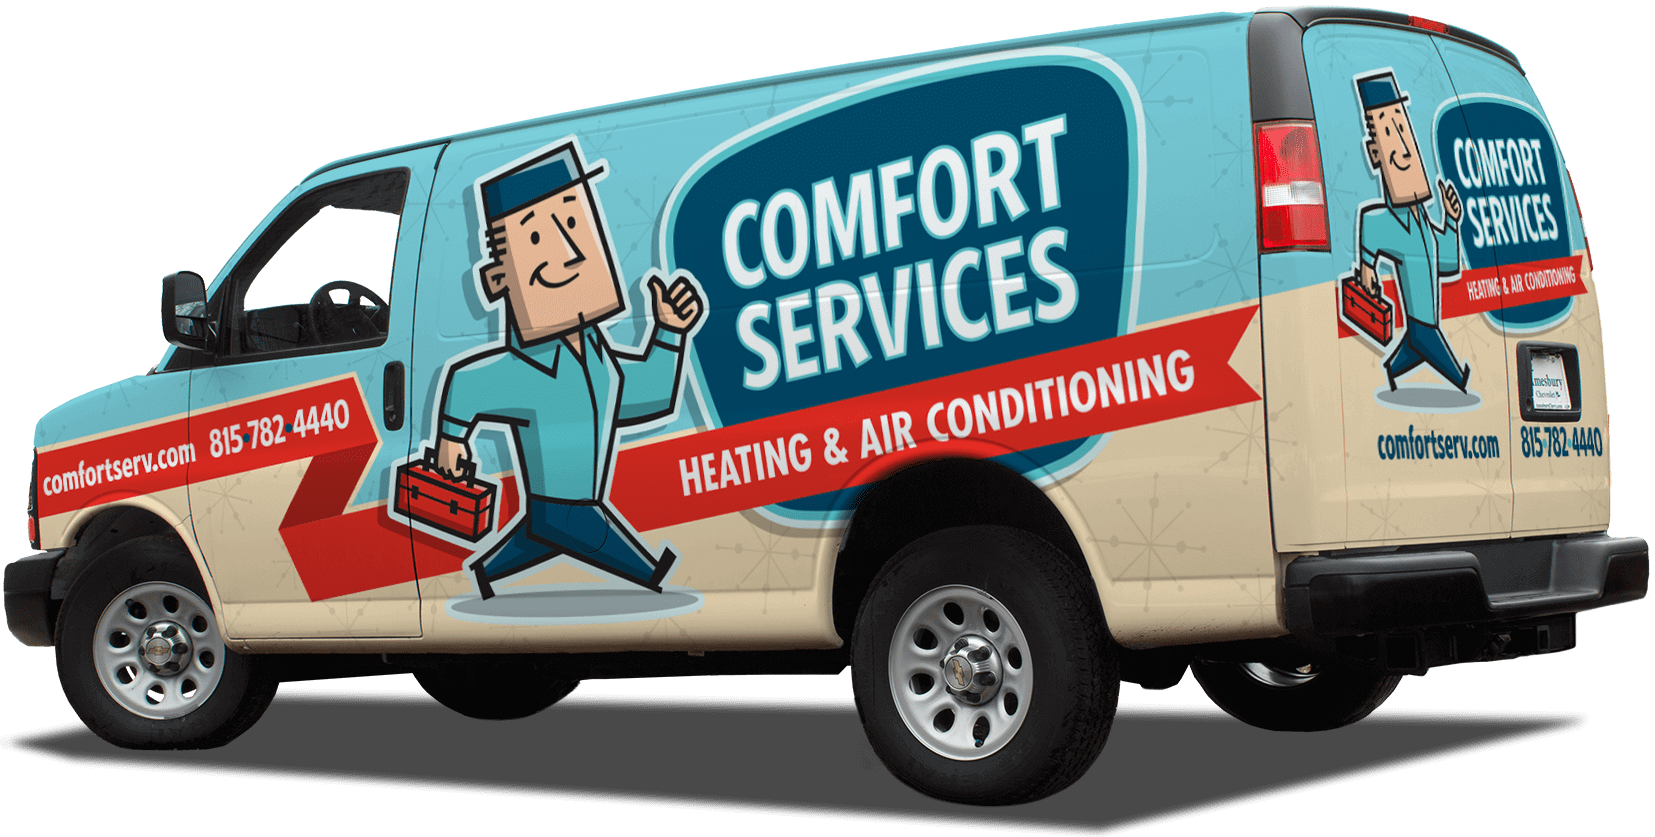 See what makes Comfort Services Heating & Air Conditioning your number one choice for Boiler repair in Naperville IL.